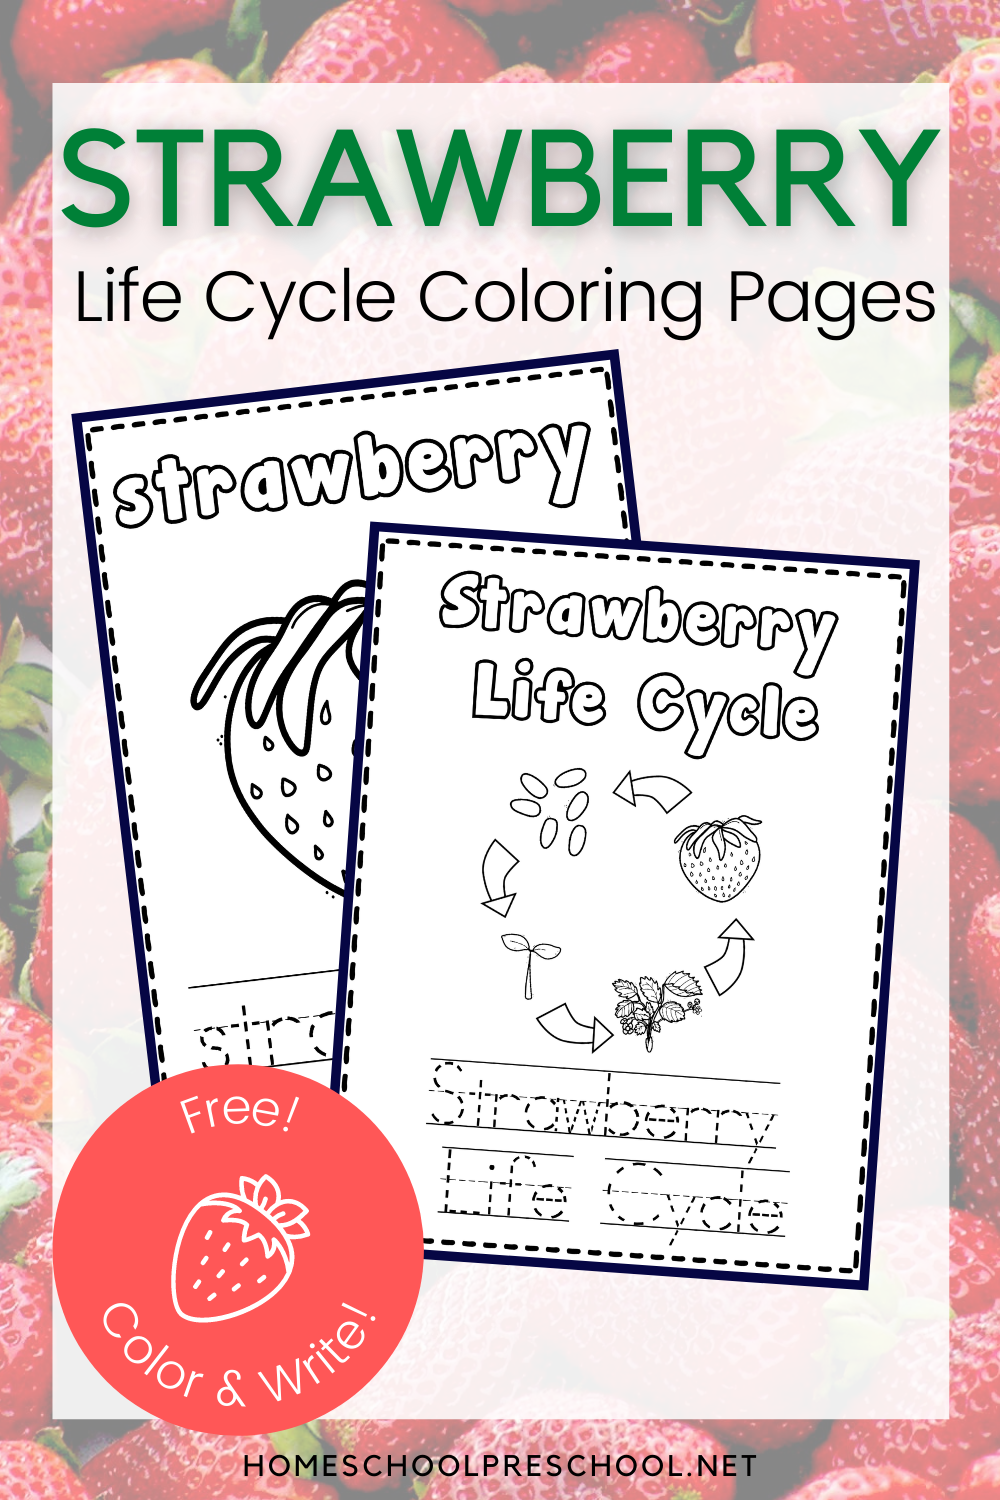 strawberry-lc-coloring-2 Life Cycle of a Strawberry